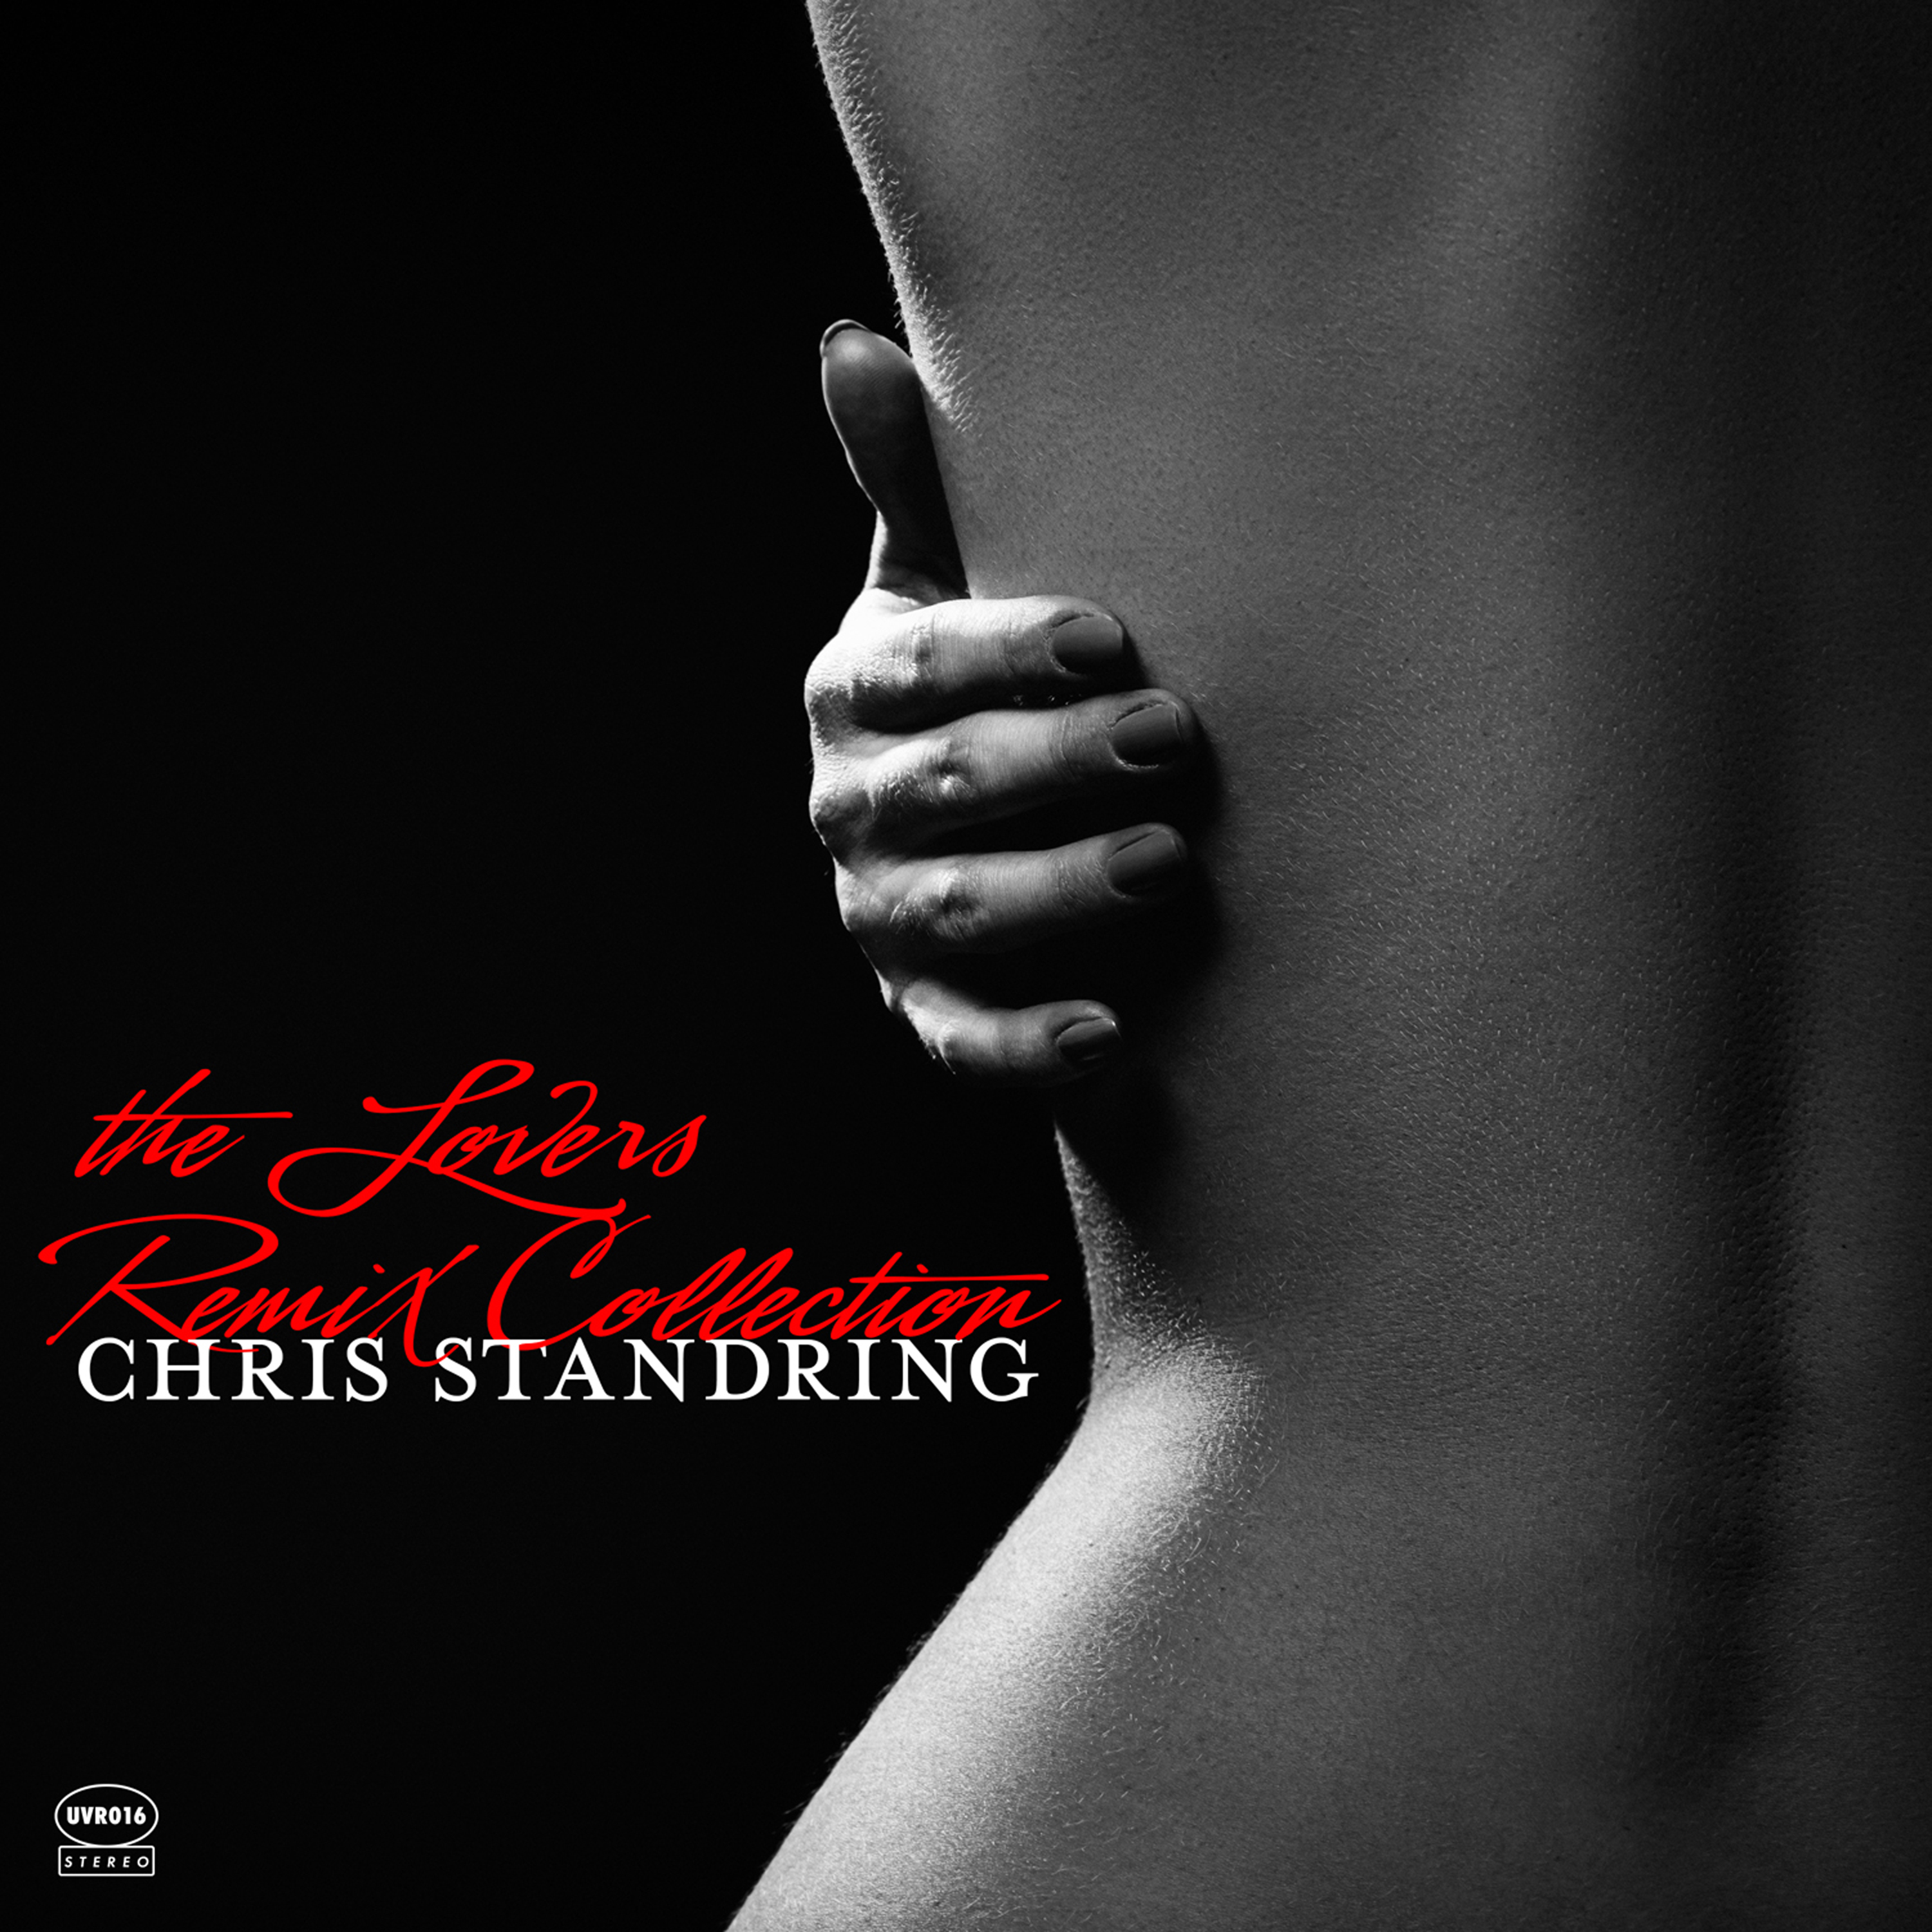 Chris Standring - Lovers Remix 24-44.1